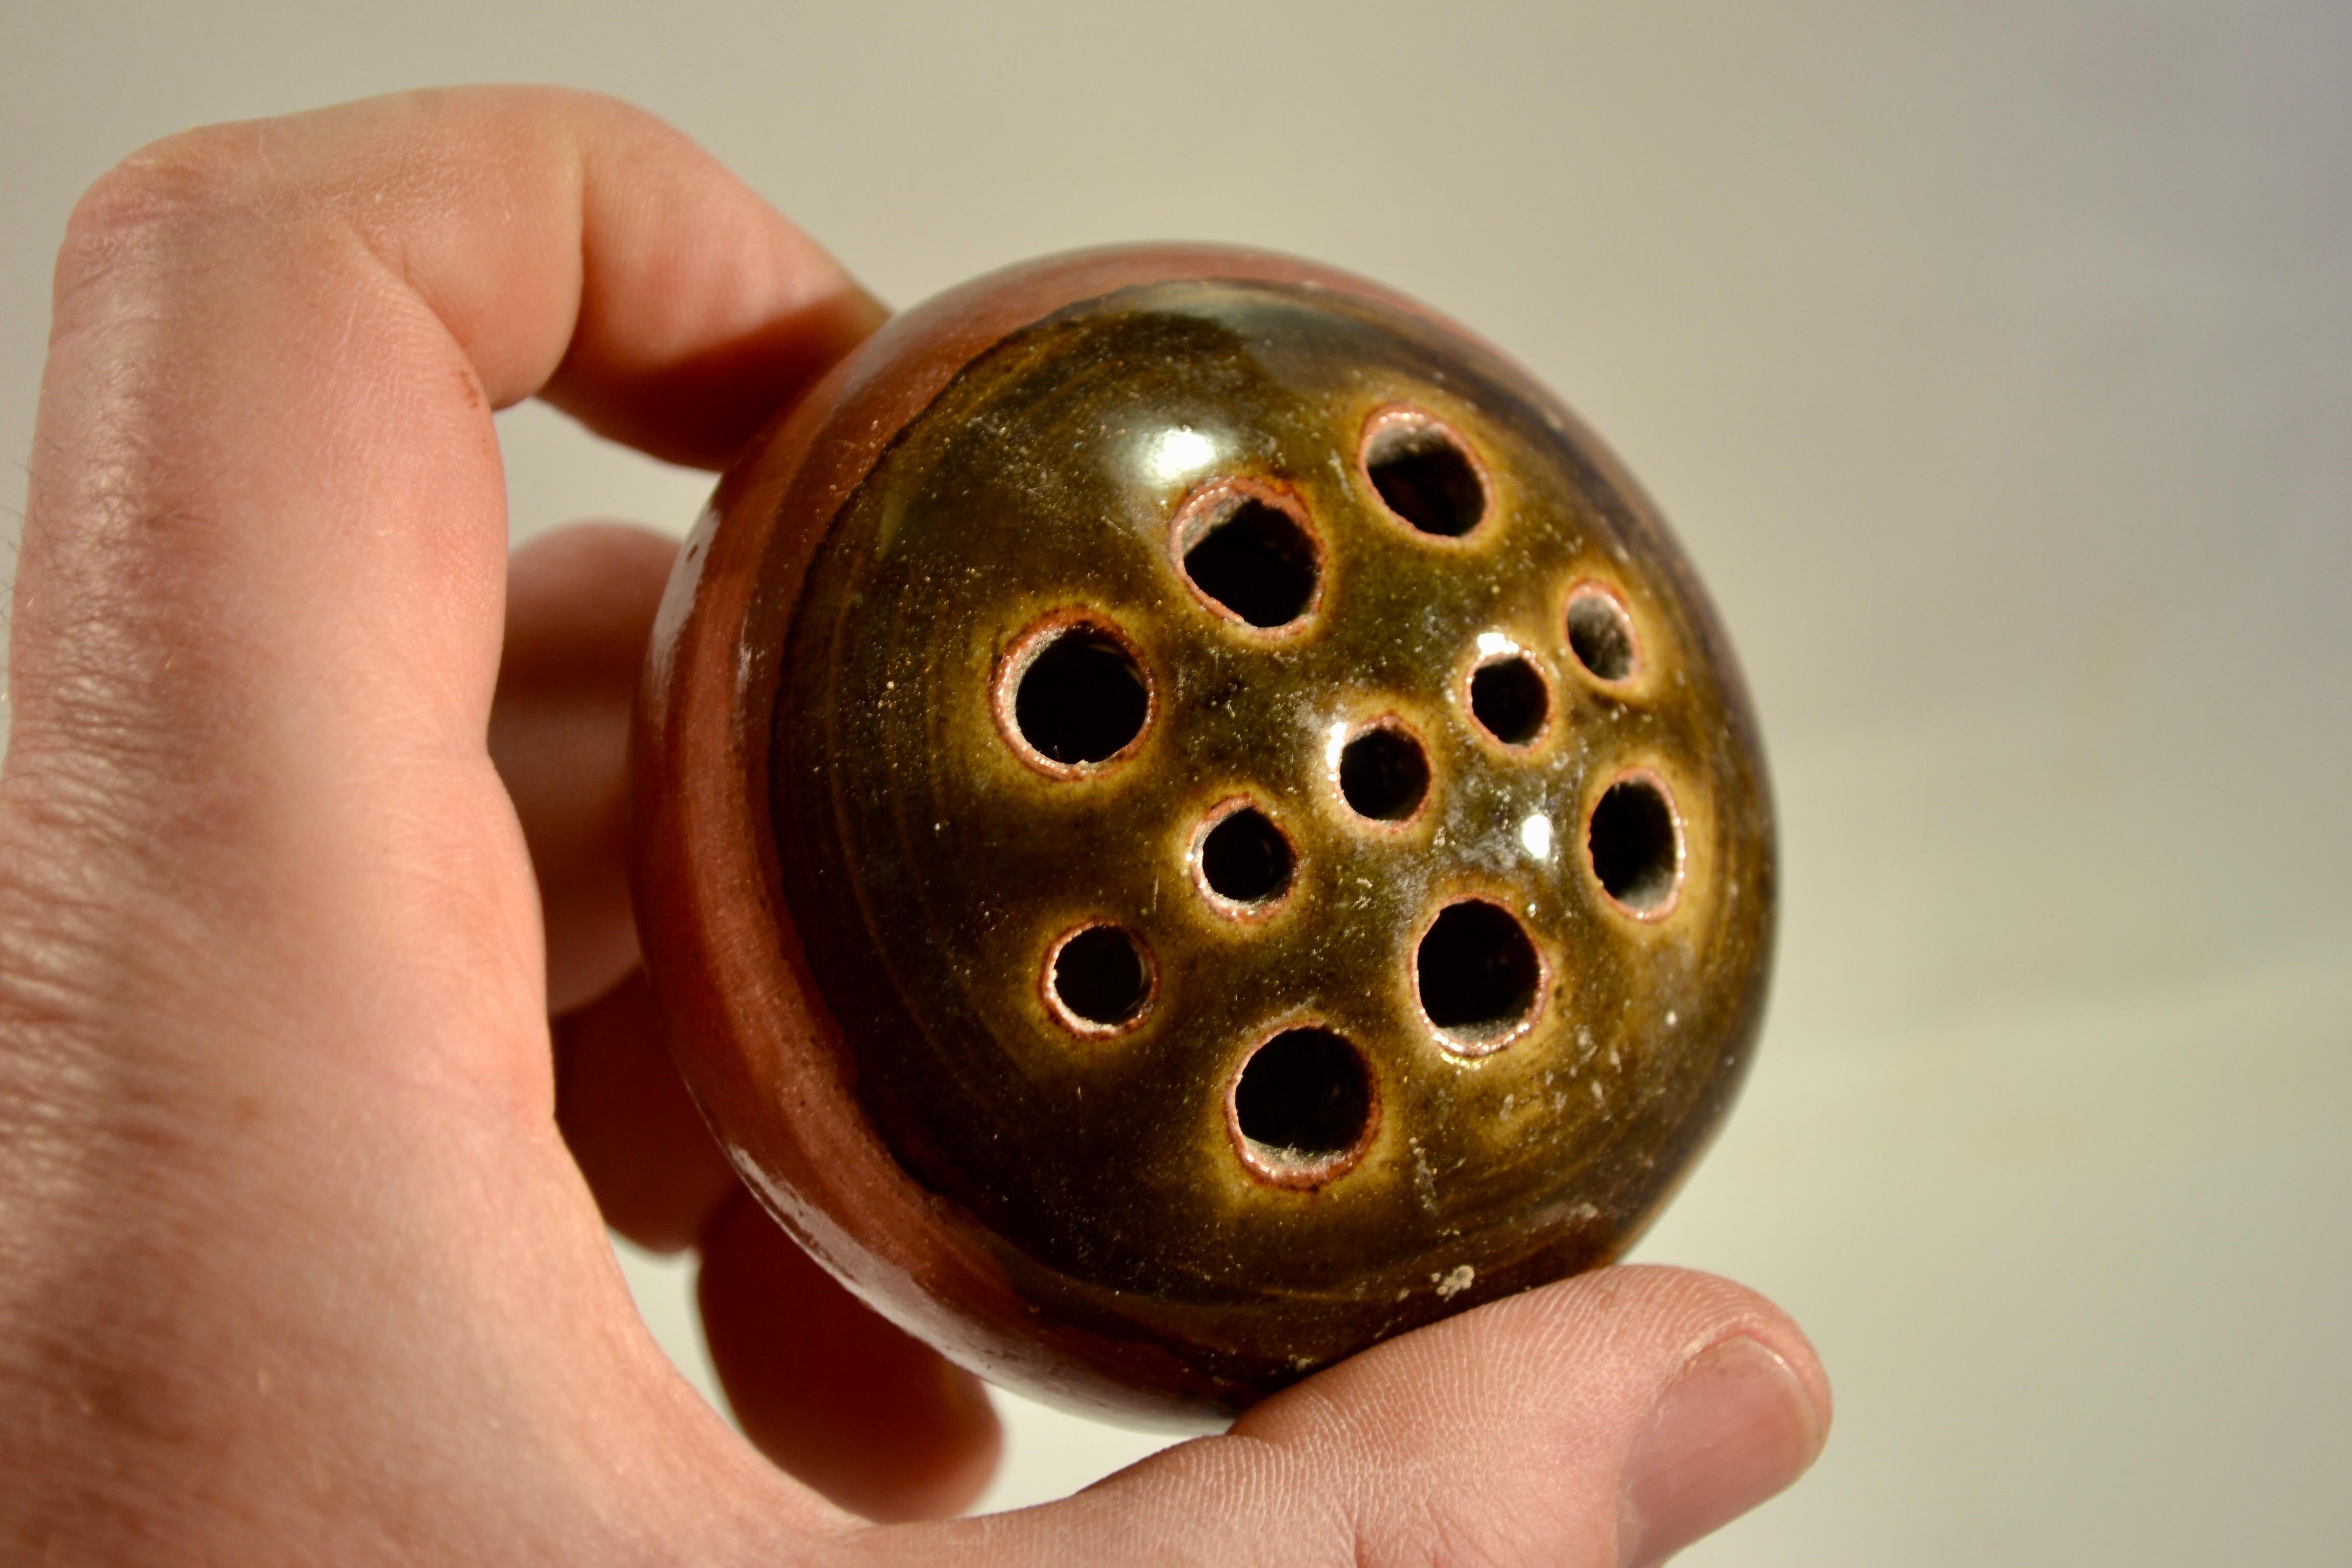 A flower pick holder made of pyrite-bearing stoneware in the shape of a sphere. French work from La Borne in the 1970s, featuring exquisite enamel.